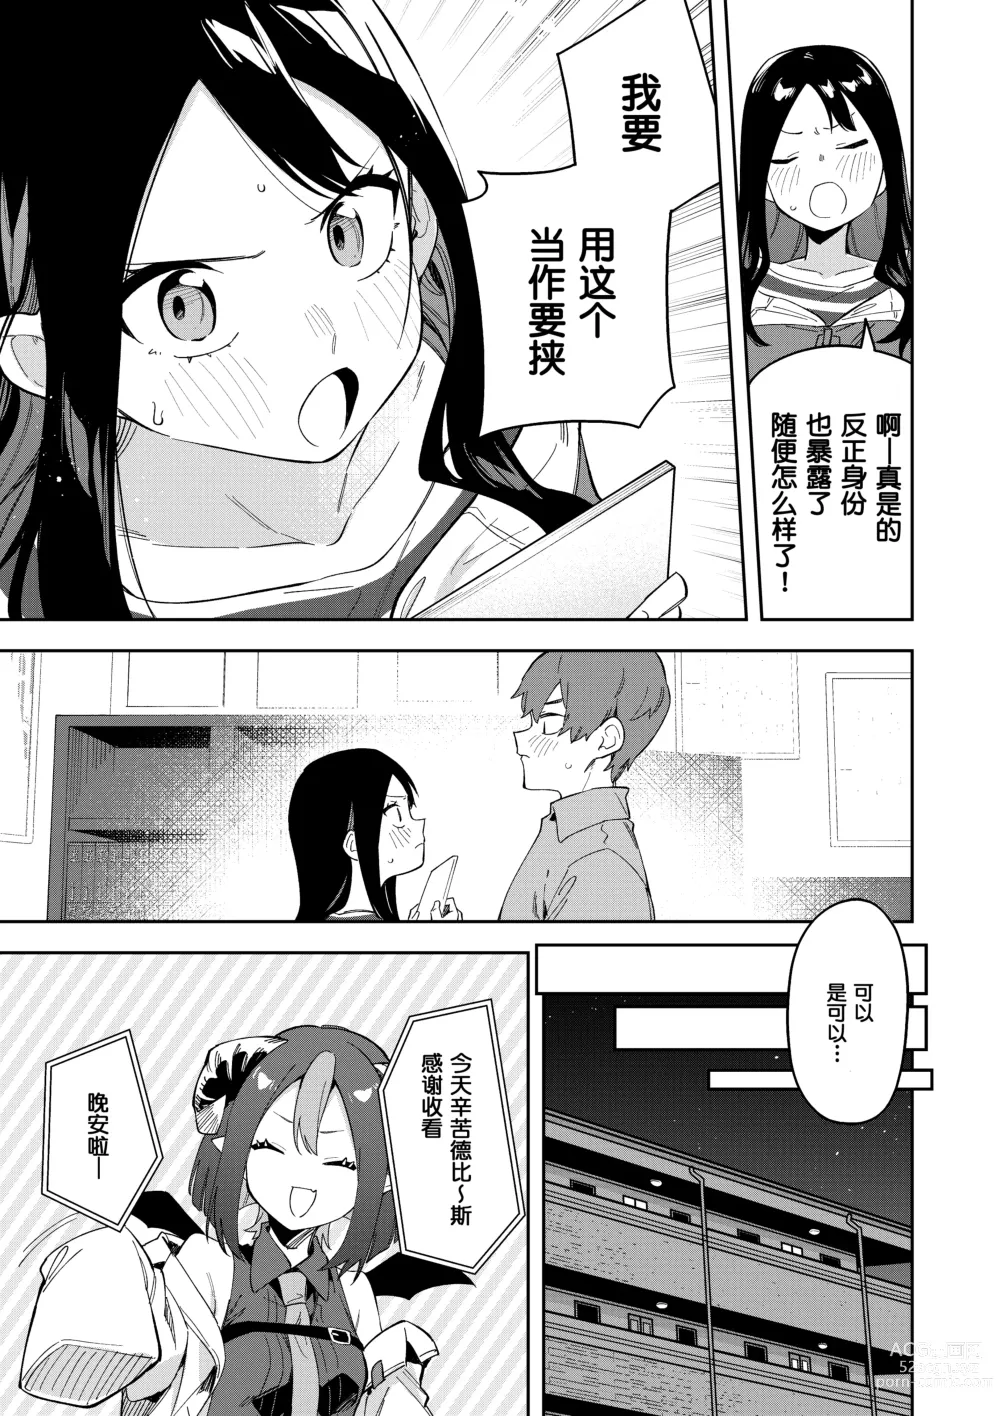 Page 15 of doujinshi 隣人は有名配信者3人目